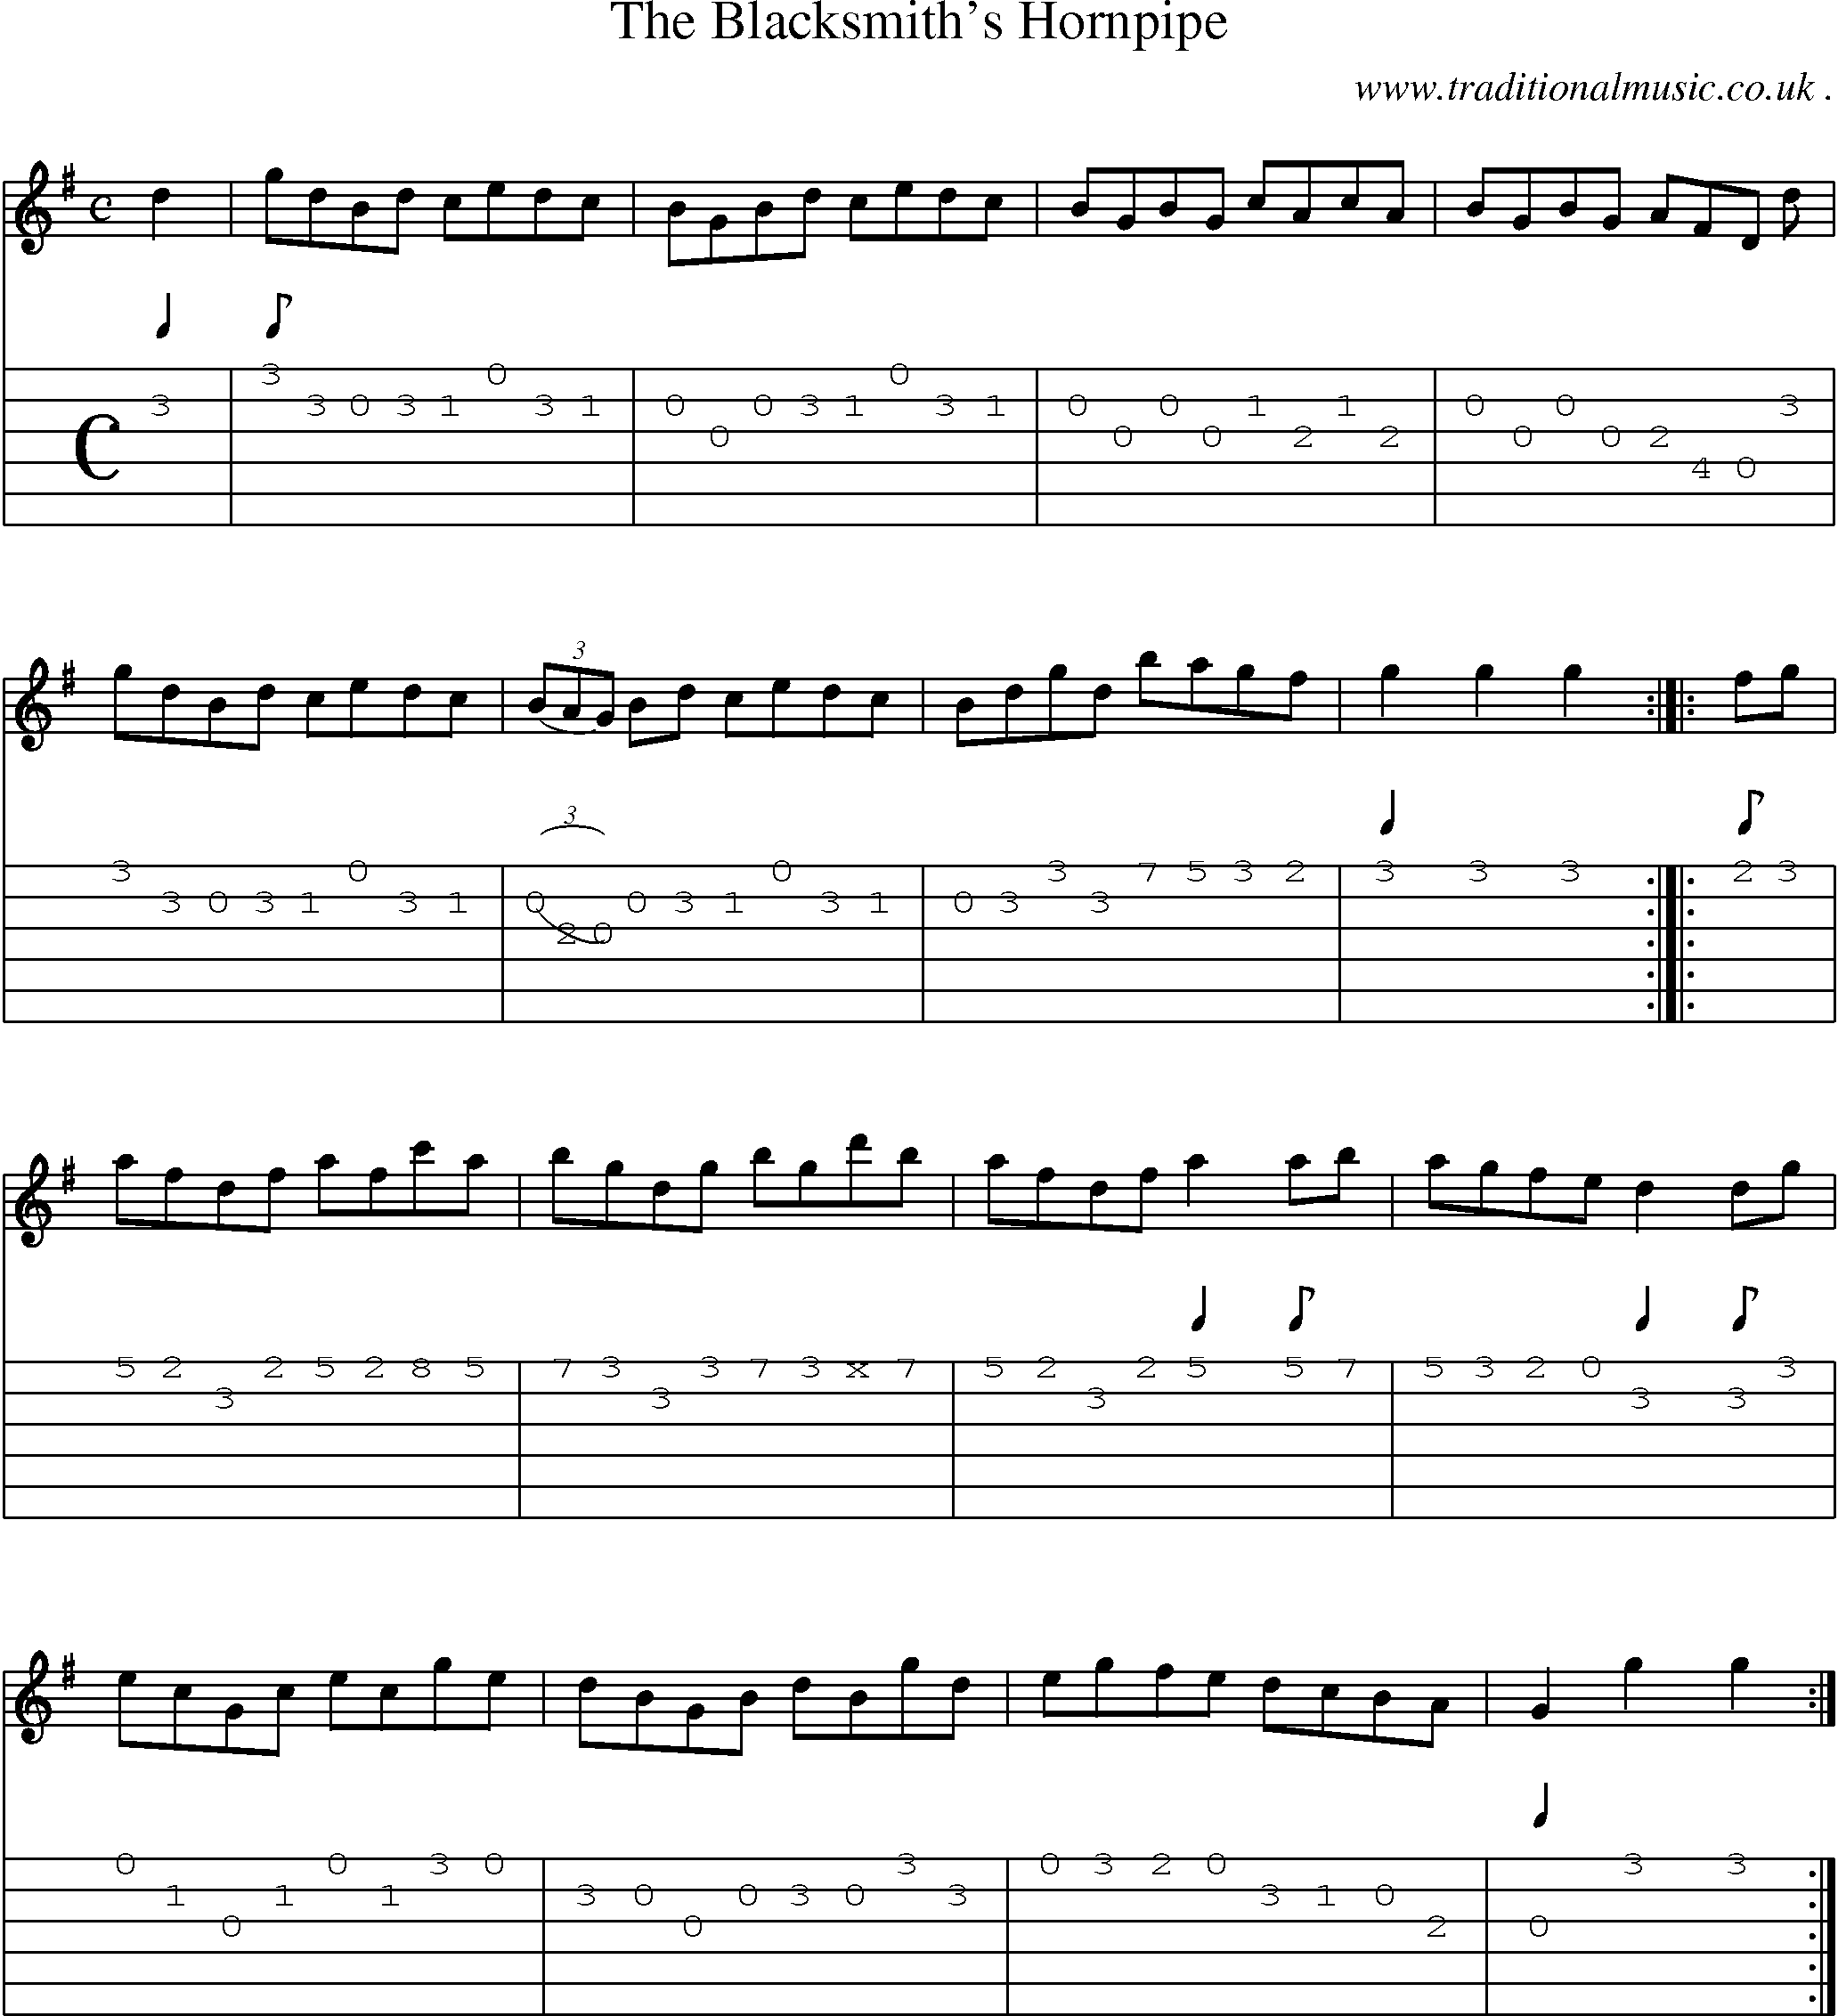 Sheet-Music and Guitar Tabs for The Blacksmiths Hornpipe